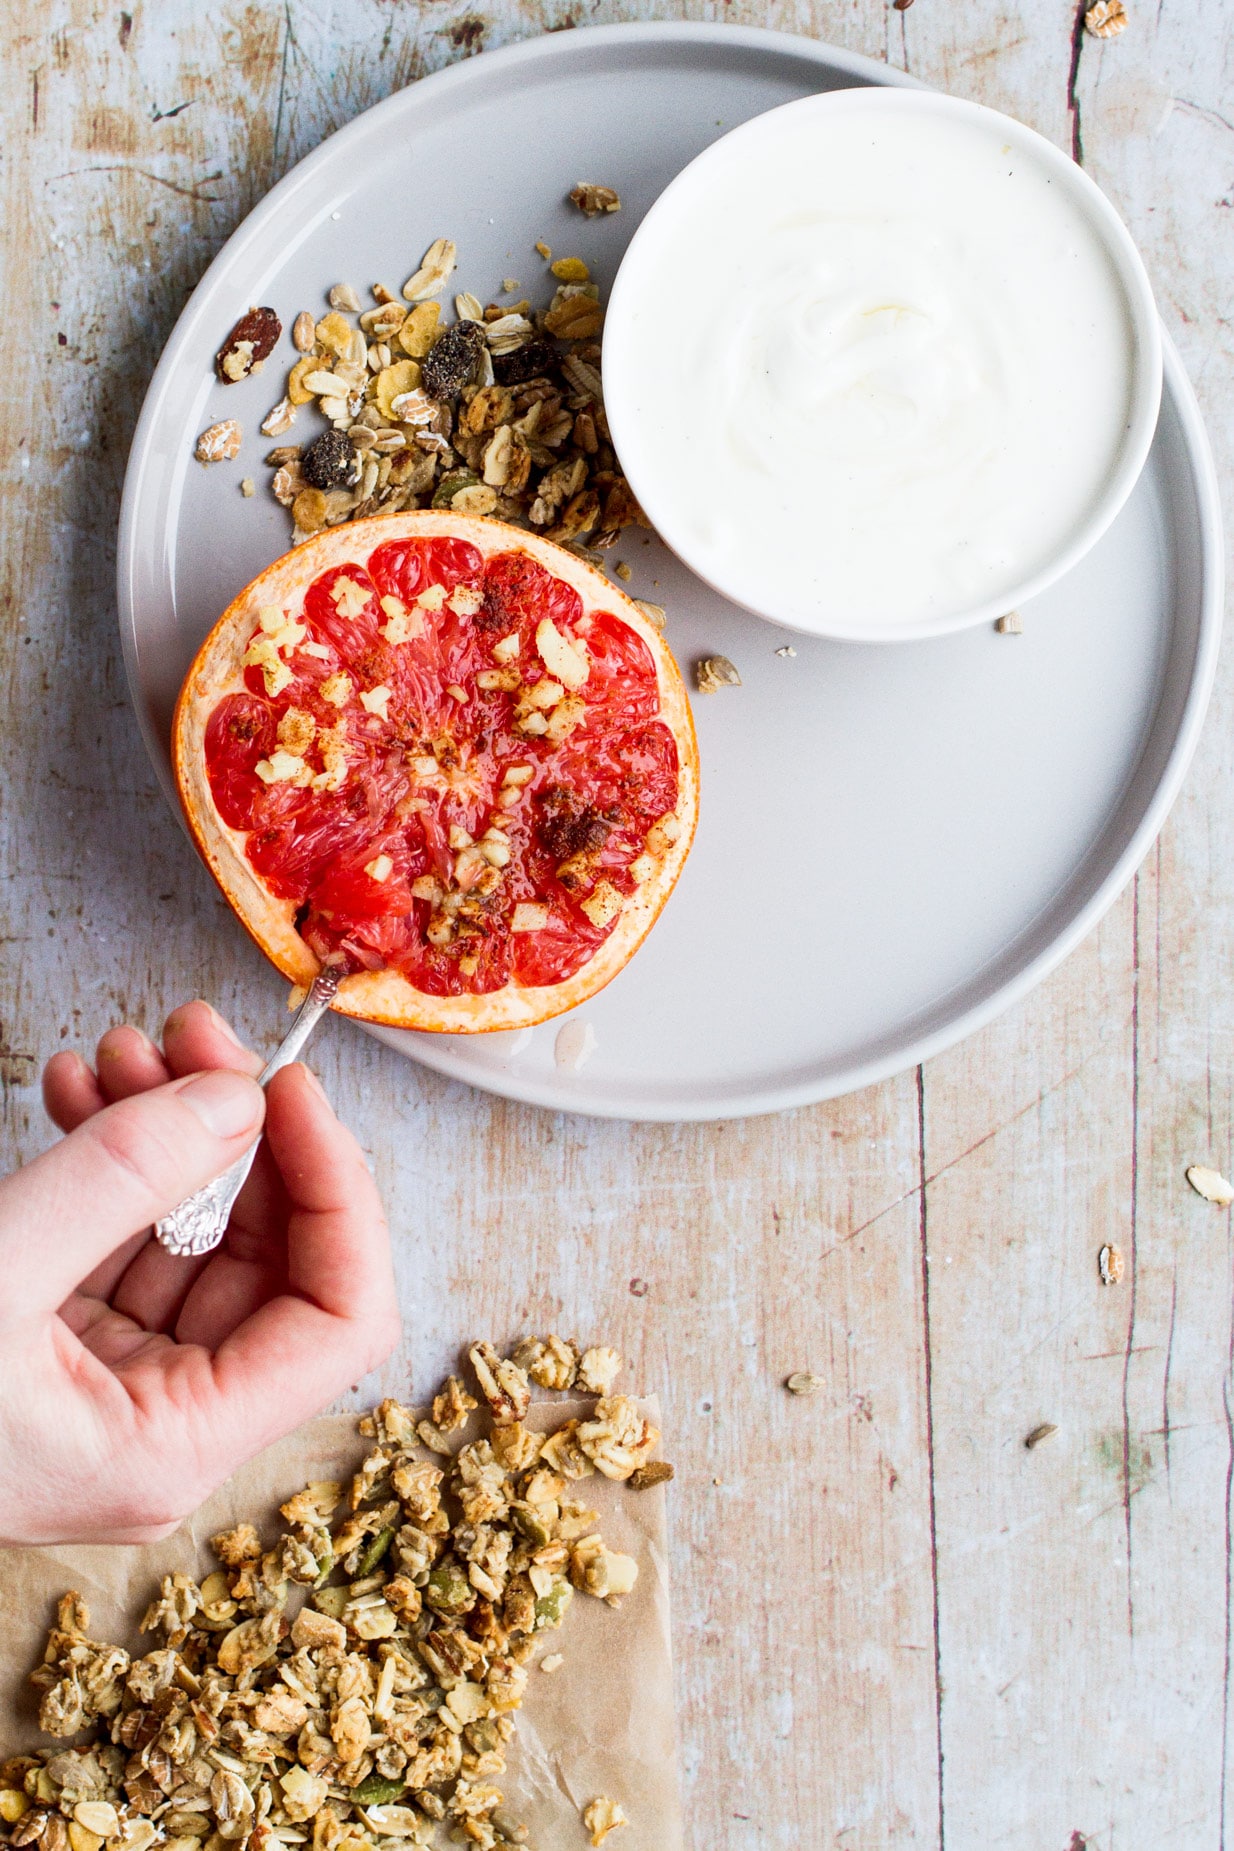 Birsd's eye view of a beige plate with one small bowl of yoghurt, a drizzle of granola and a baked grapefruit. A hand scooping up a piece with a spoon. Light wooden background